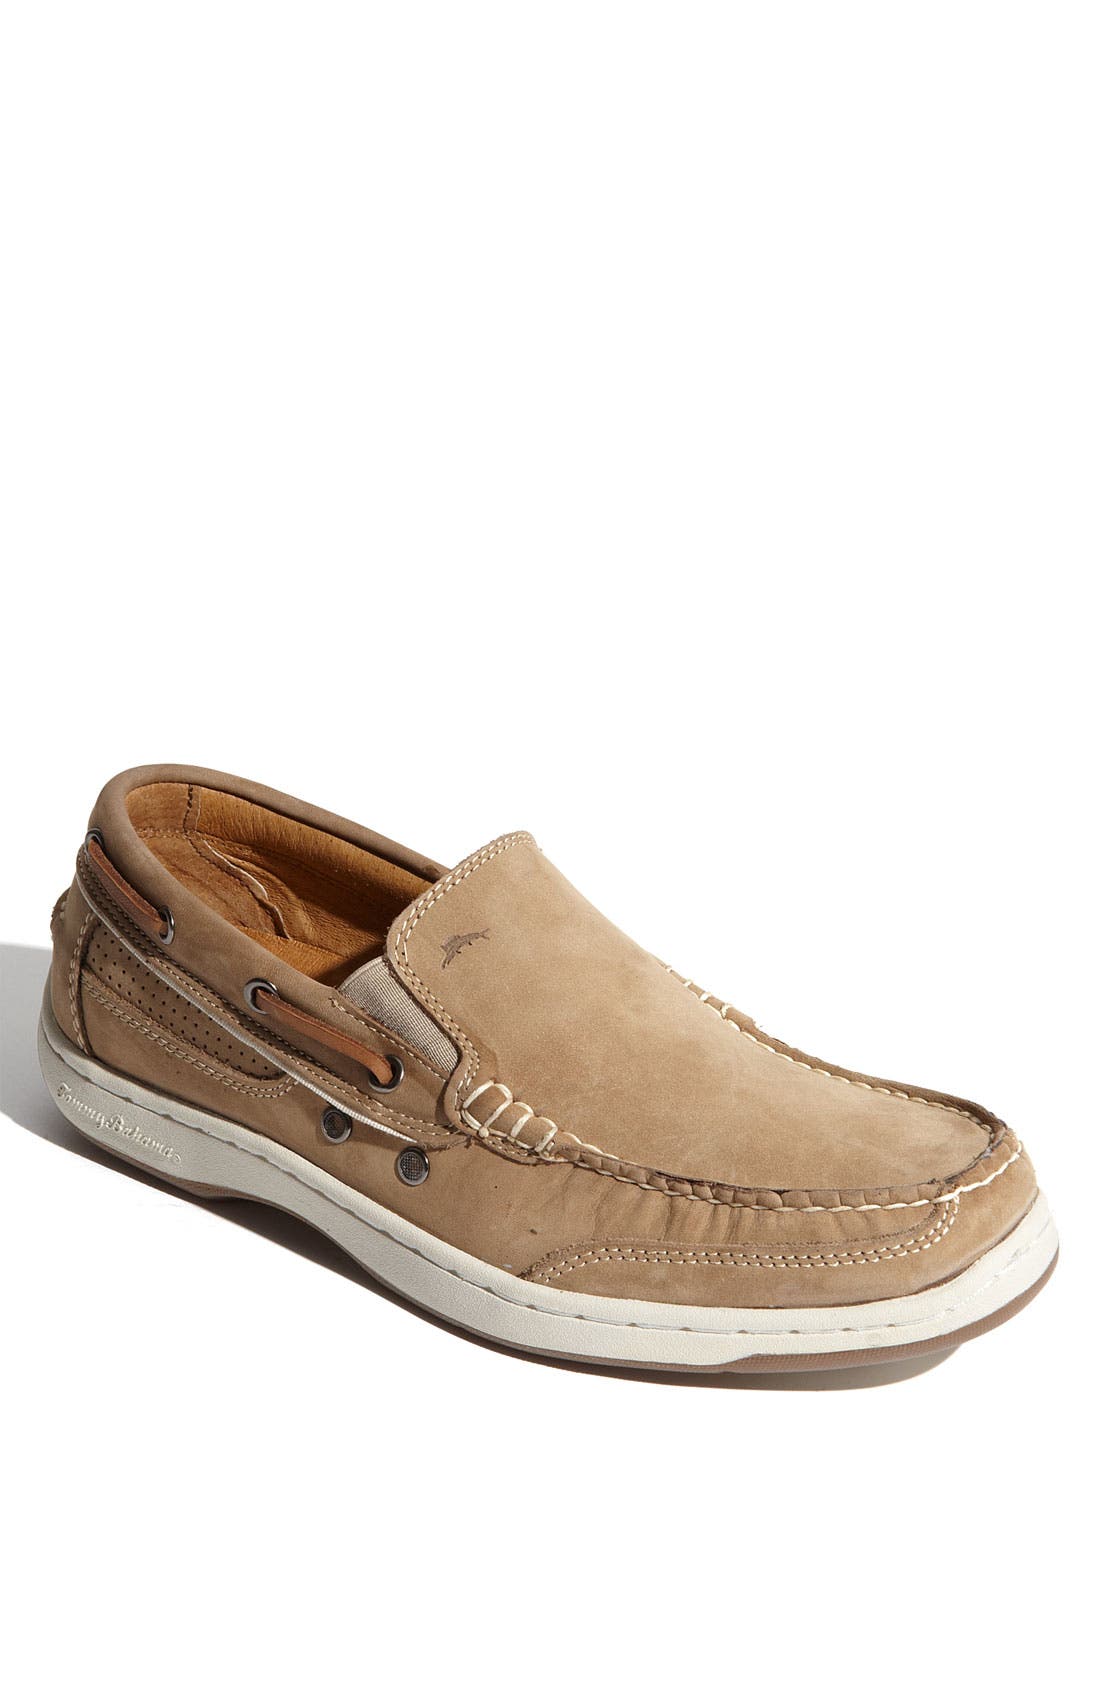 Tommy Bahama 'First Mate' Boat Shoe 